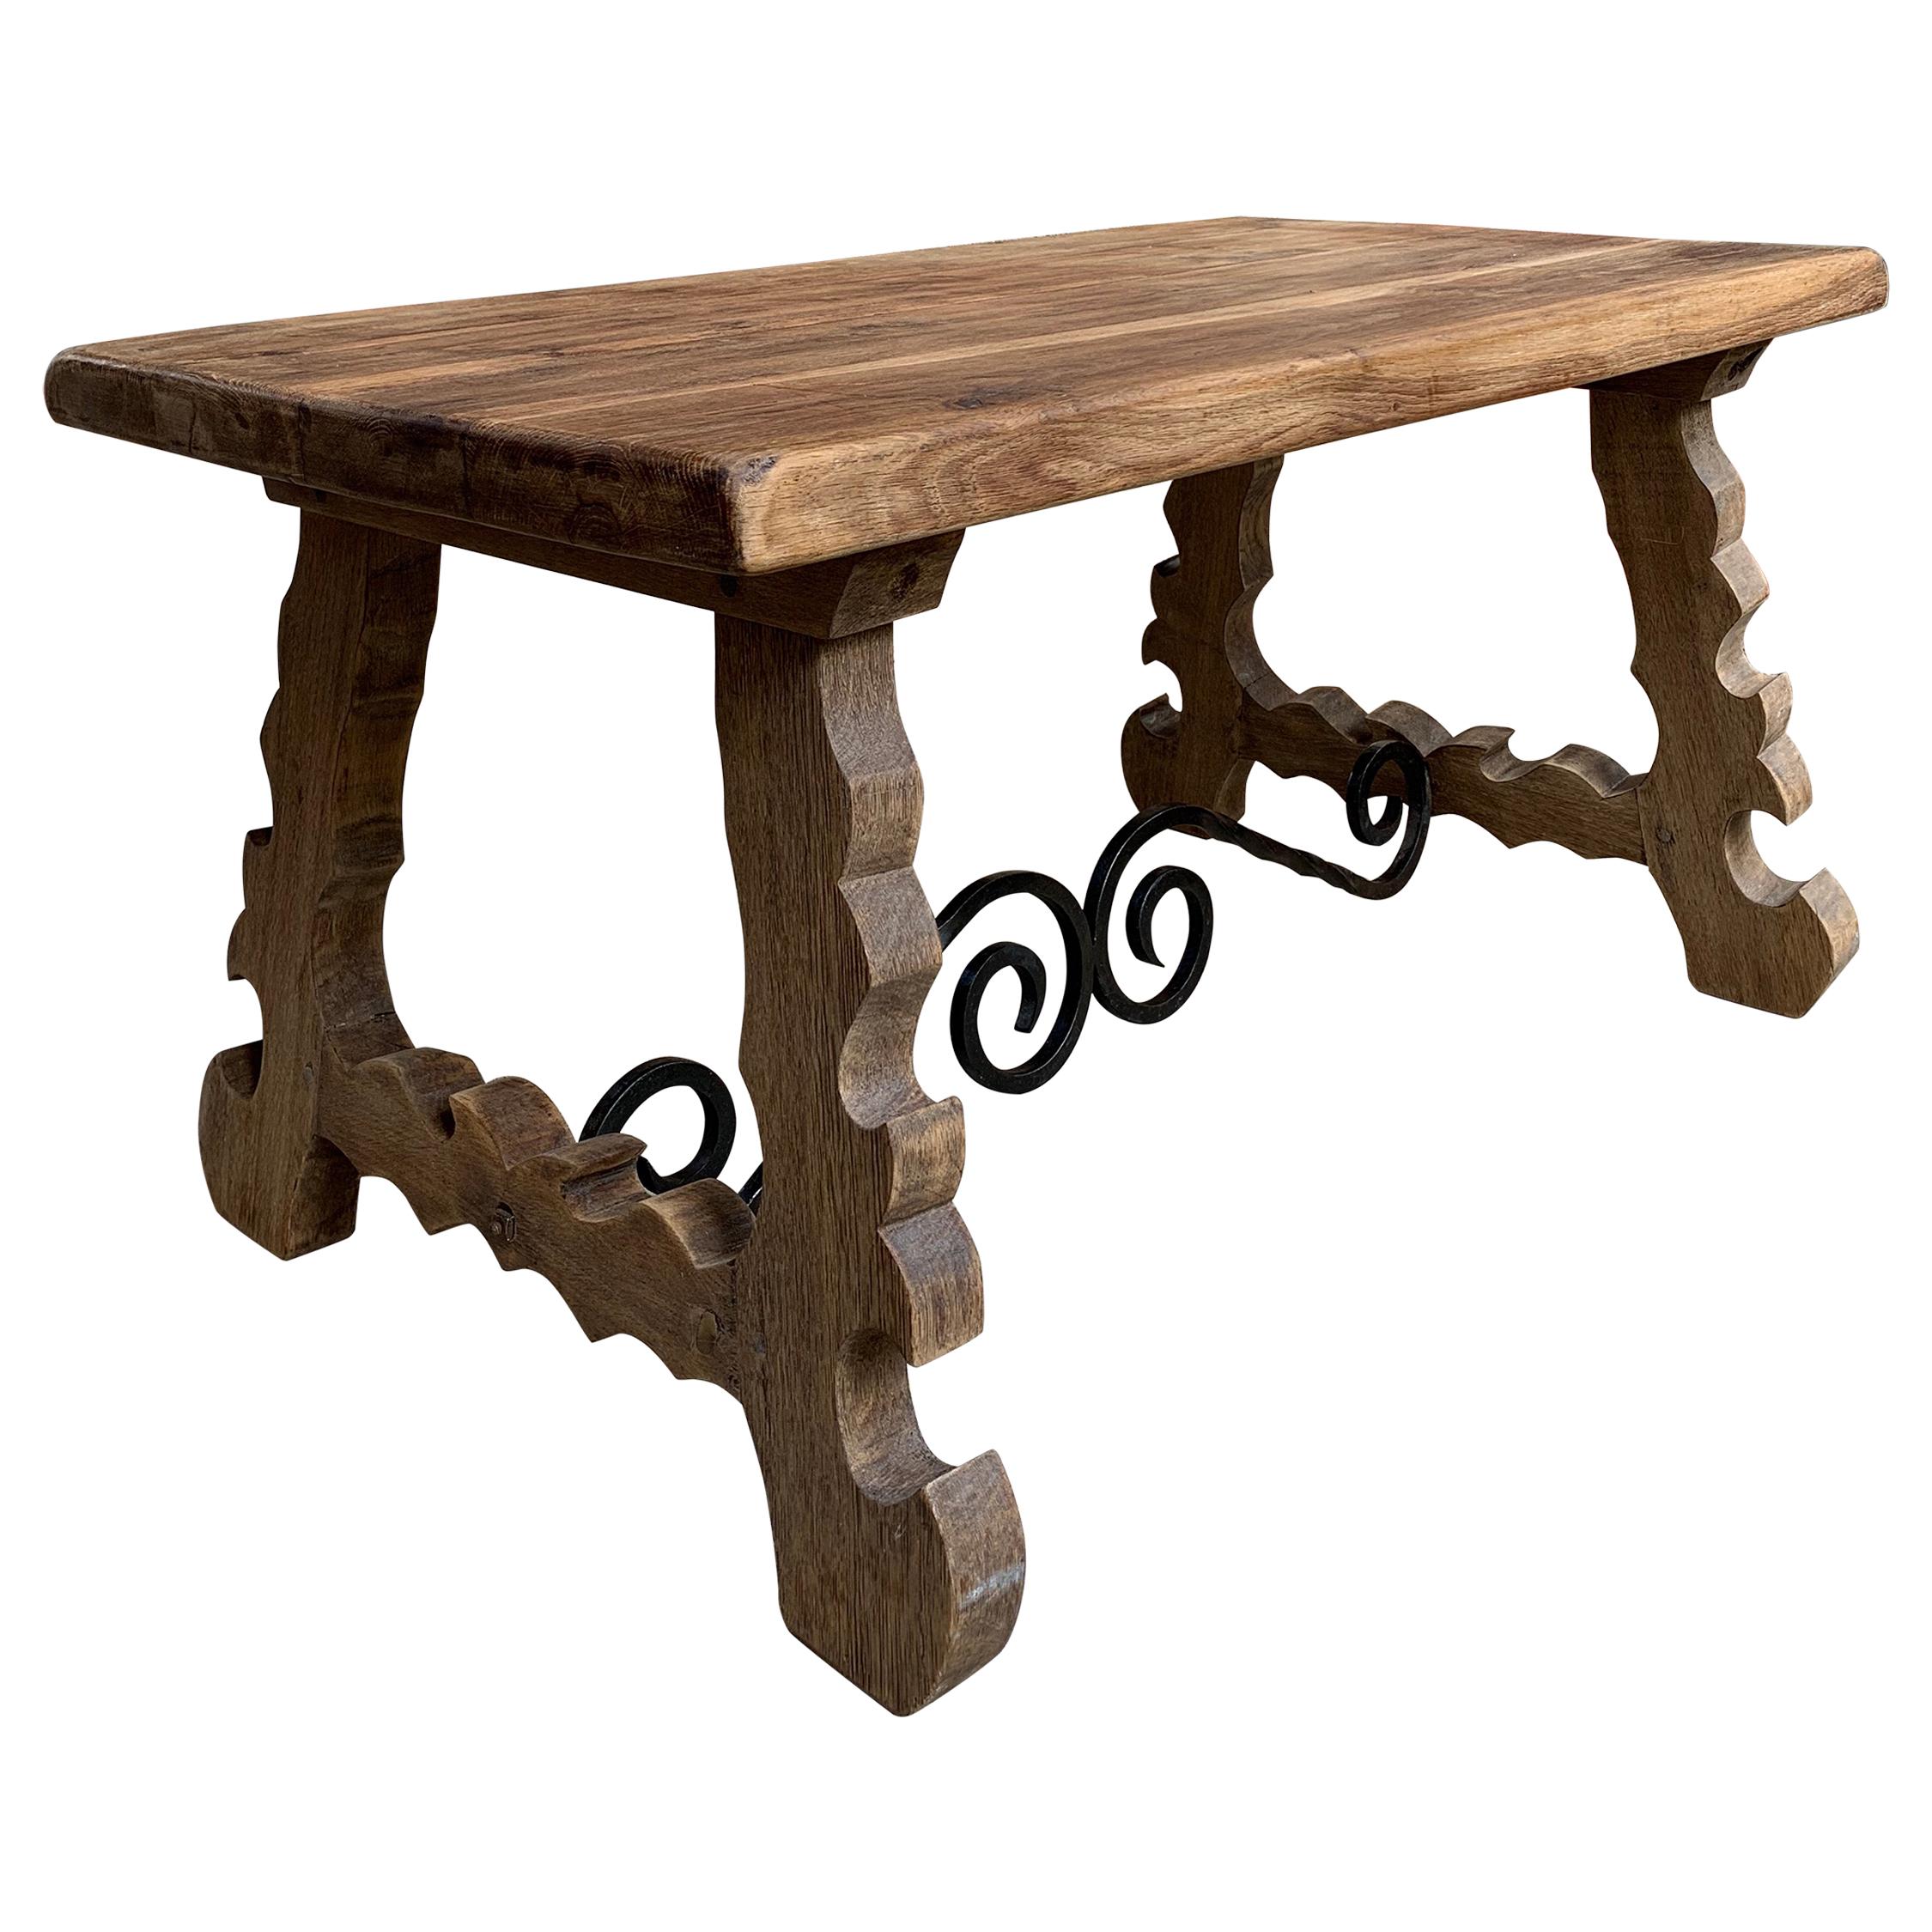 Antique French Country Oak Coffee Table Bench Catalan Spanish Iron Bleached